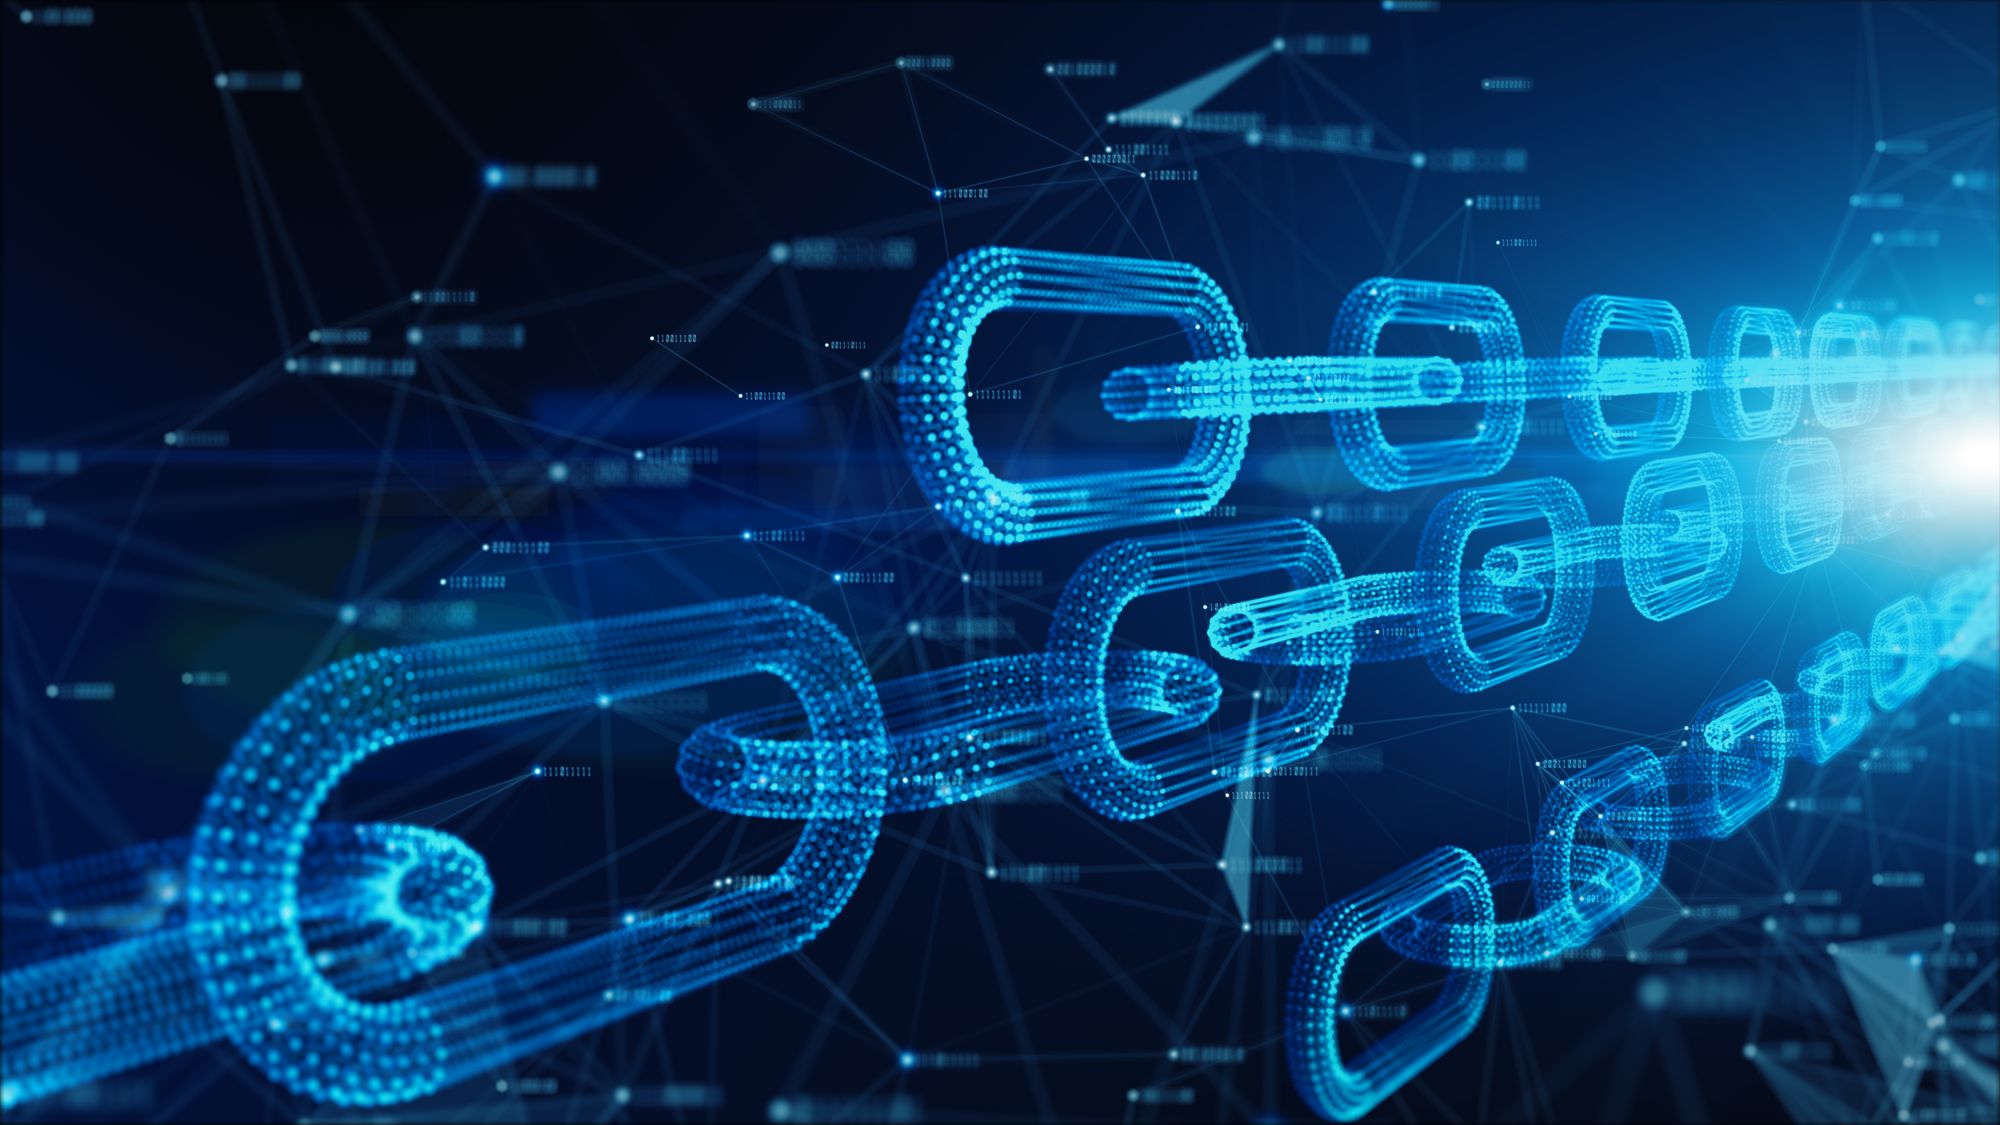 A picture of 3 blue, connected, digital chains